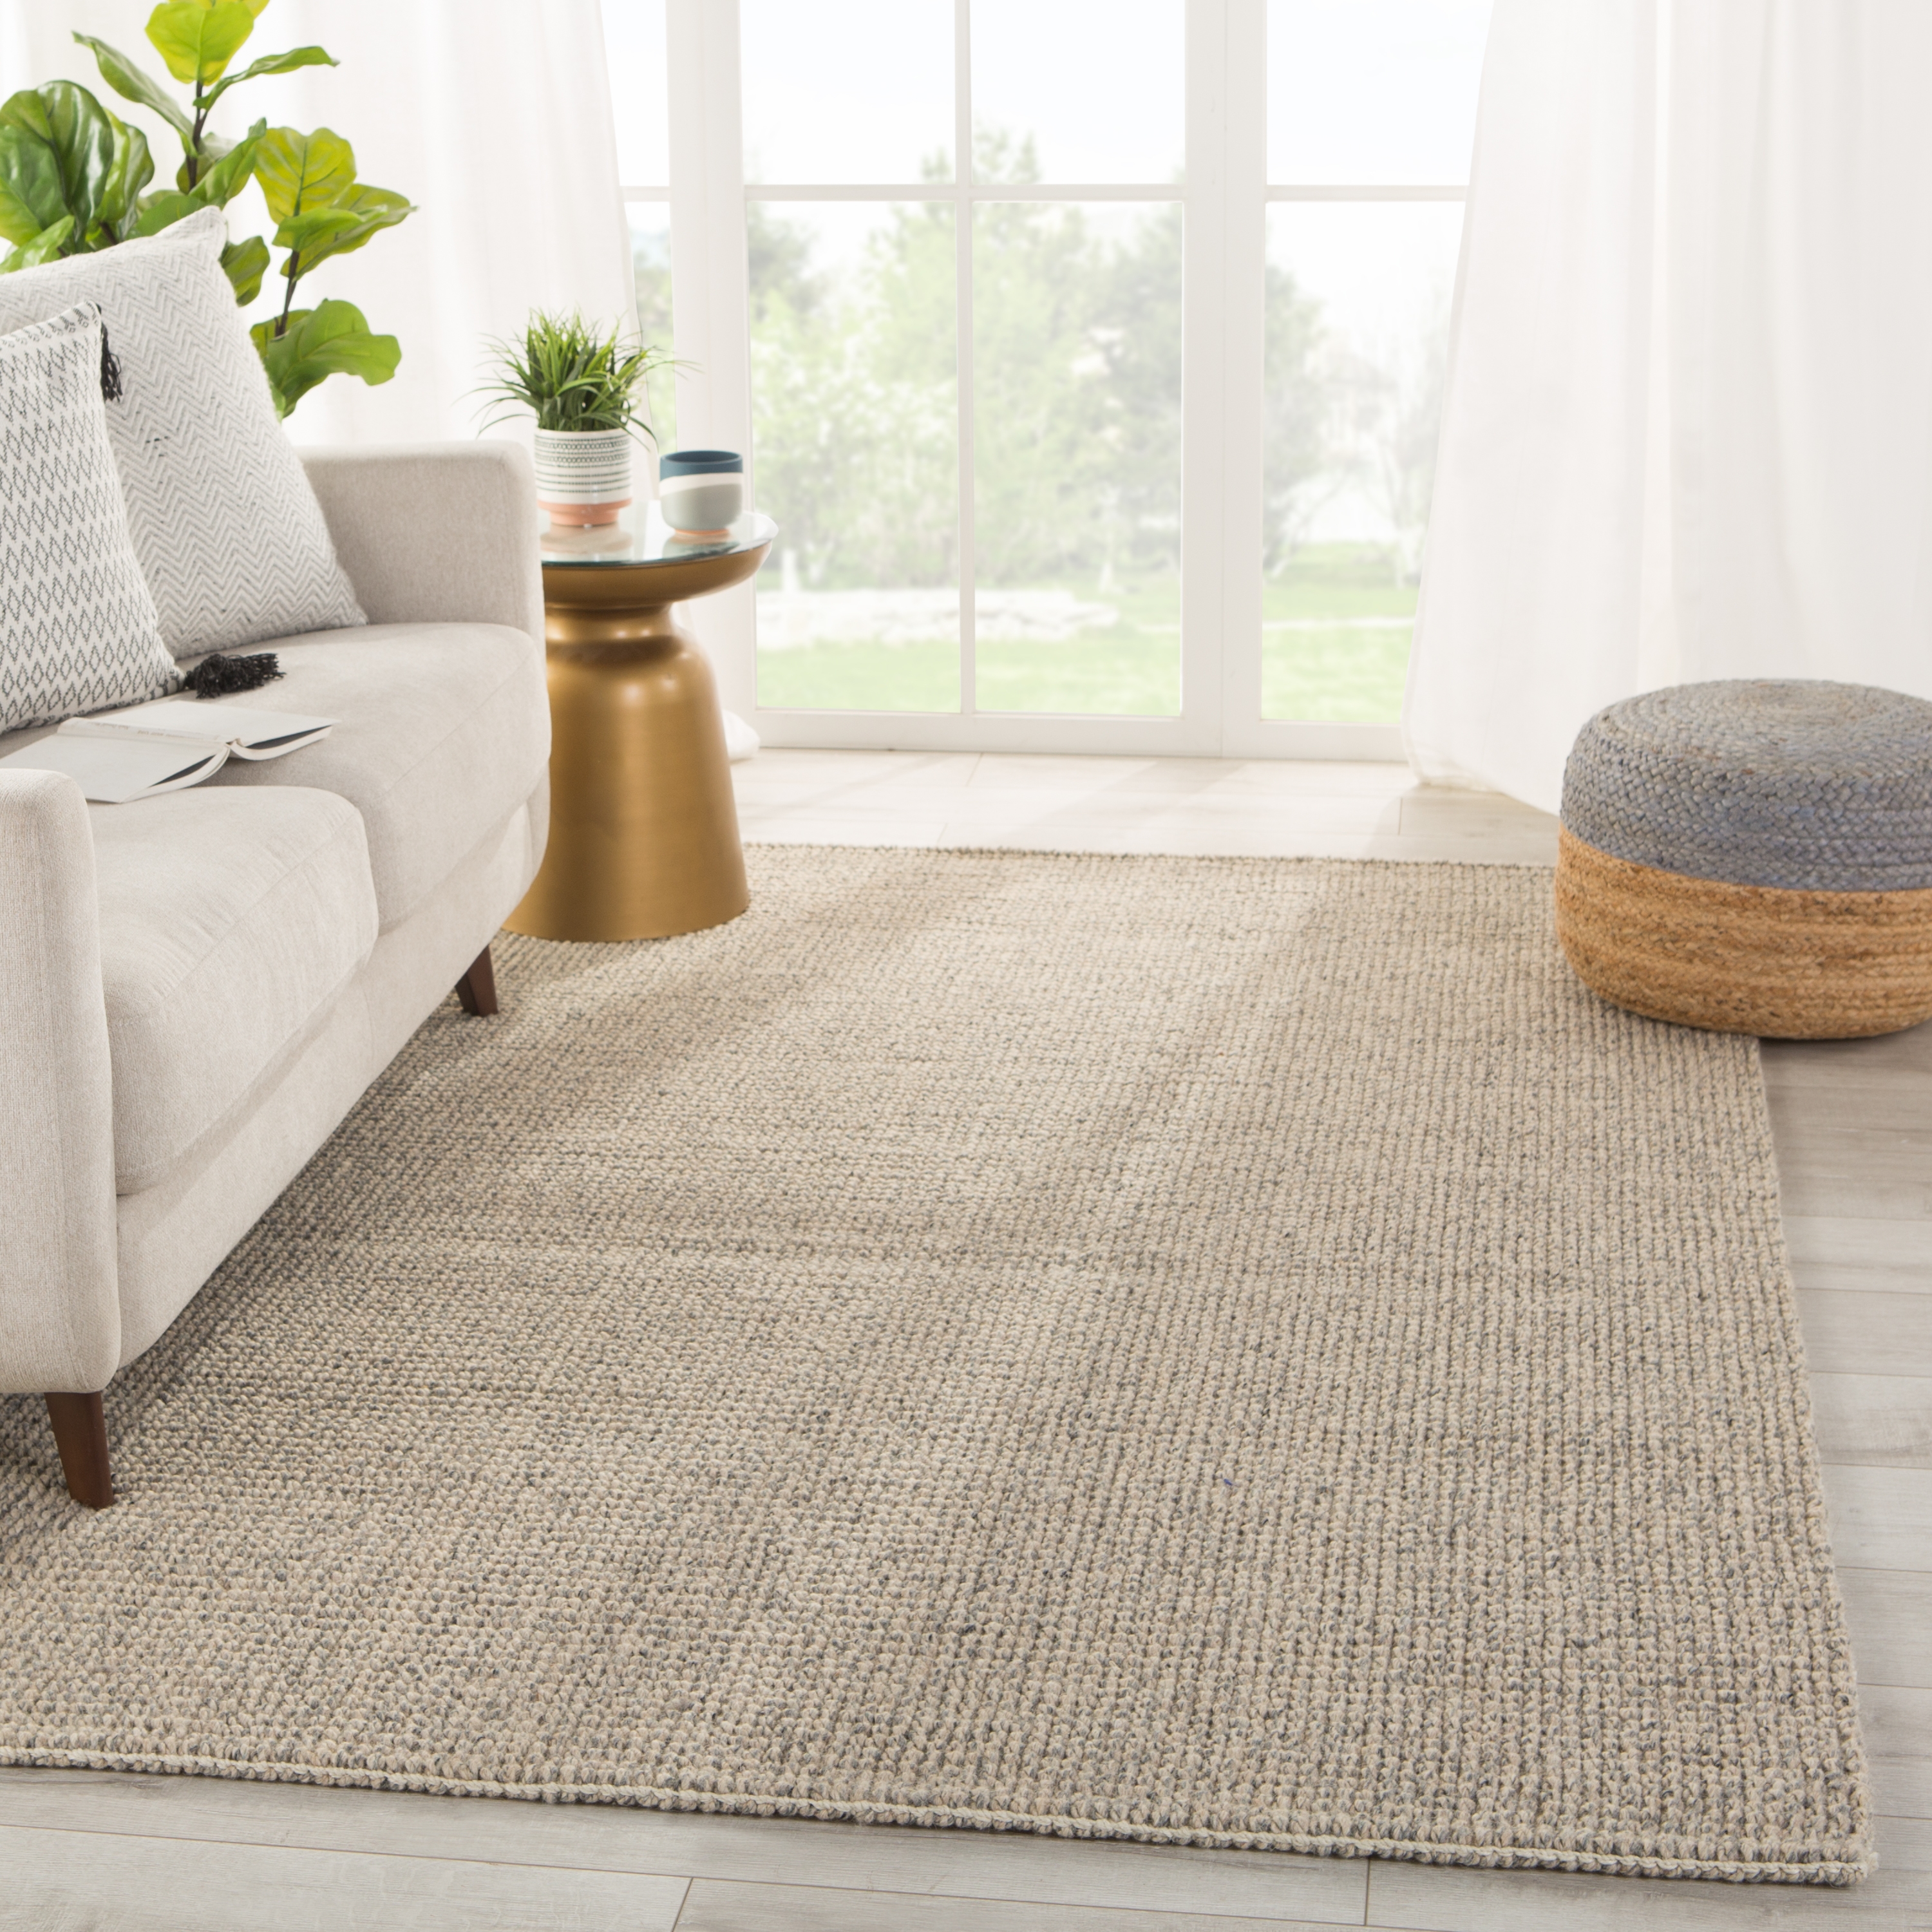 Chael Natural Solid Gray/ Beige Area Rug (10'X14') - Image 4